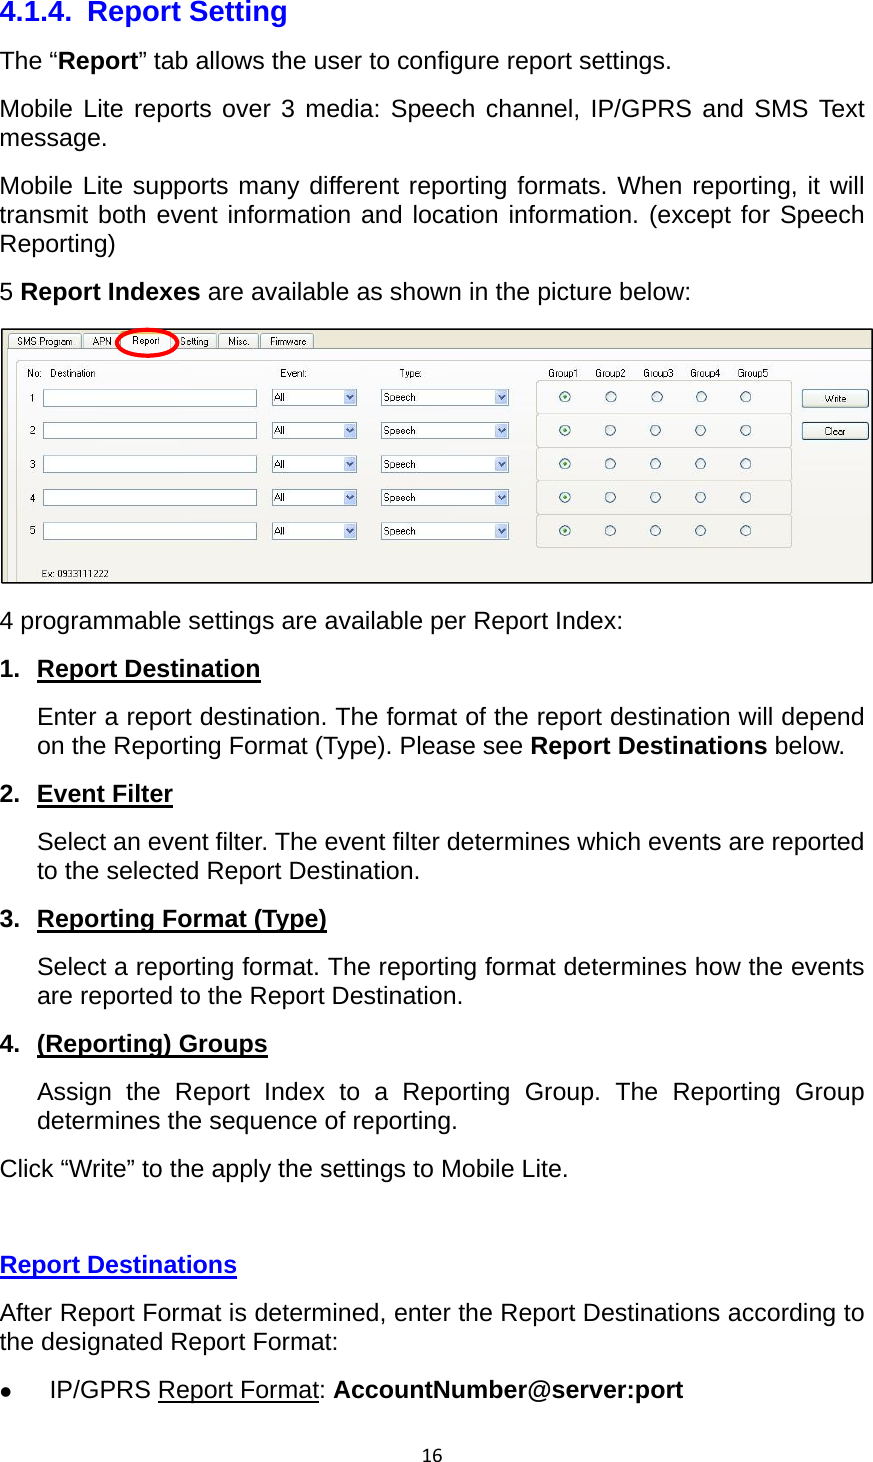 164.1.4. Report Setting The “Report” tab allows the user to configure report settings. Mobile Lite reports over 3 media: Speech channel, IP/GPRS and SMS Text message. Mobile Lite supports many different reporting formats. When reporting, it will transmit both event information and location information. (except for Speech Reporting) 5 Report Indexes are available as shown in the picture below: 4 programmable settings are available per Report Index: 1. Report Destination Enter a report destination. The format of the report destination will depend on the Reporting Format (Type). Please see Report Destinations below. 2. Event Filter Select an event filter. The event filter determines which events are reported to the selected Report Destination. 3.  Reporting Format (Type) Select a reporting format. The reporting format determines how the events are reported to the Report Destination. 4. (Reporting) Groups Assign the Report Index to a Reporting Group. The Reporting Group determines the sequence of reporting. Click “Write” to the apply the settings to Mobile Lite.  Report Destinations After Report Format is determined, enter the Report Destinations according to the designated Report Format:  IP/GPRS Report Format: AccountNumber@server:port  